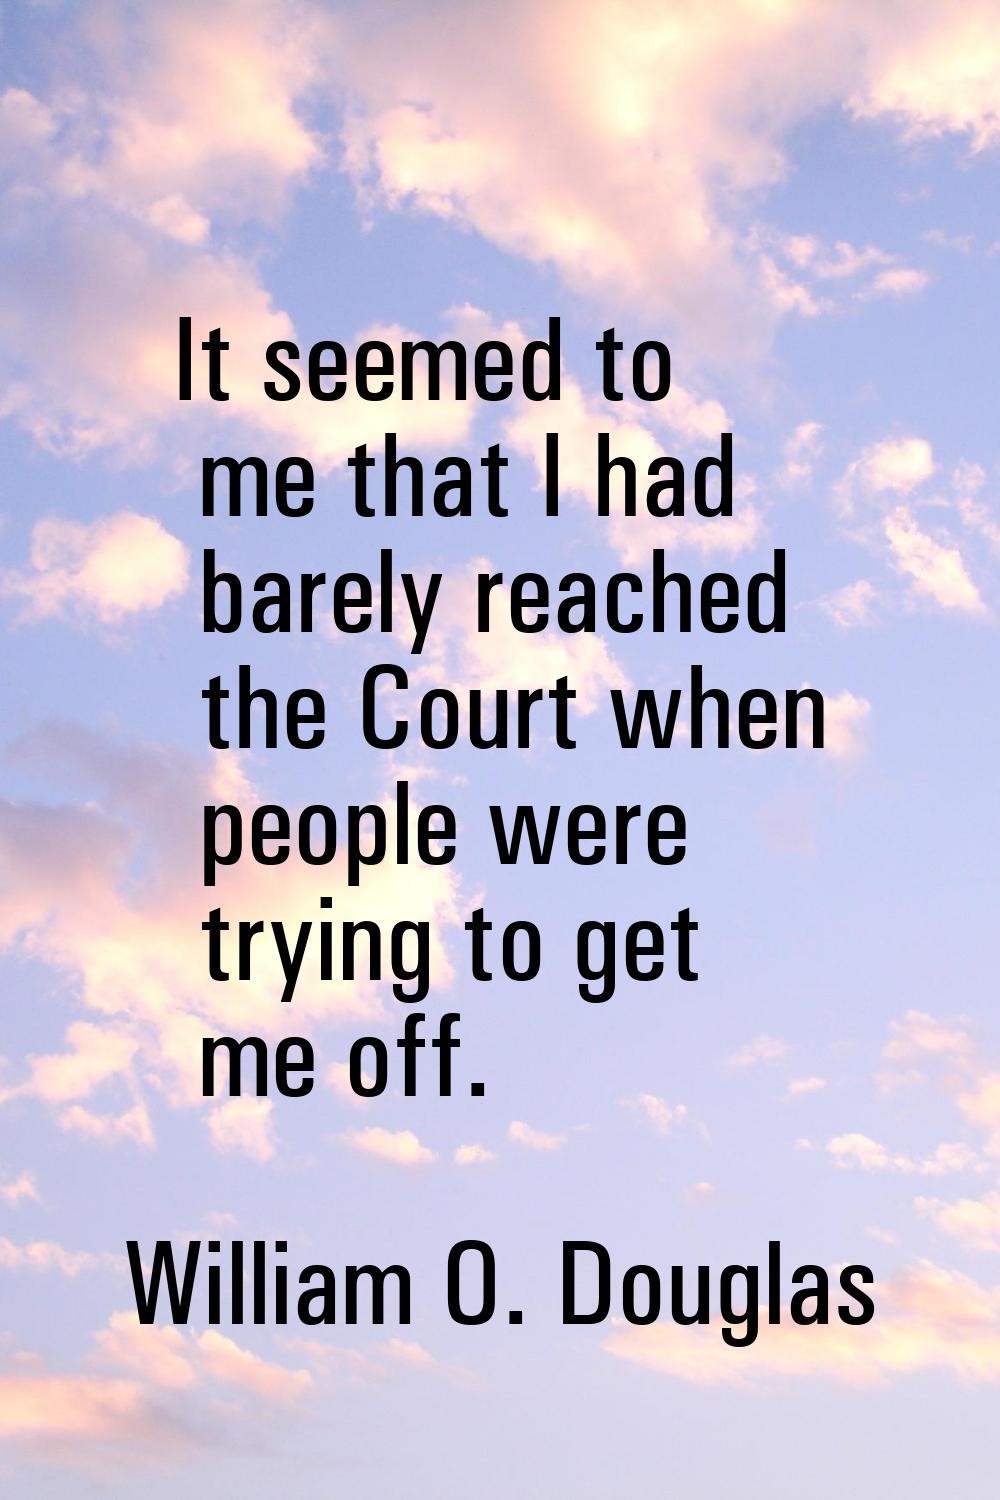 It seemed to me that I had barely reached the Court when people were trying to get me off.